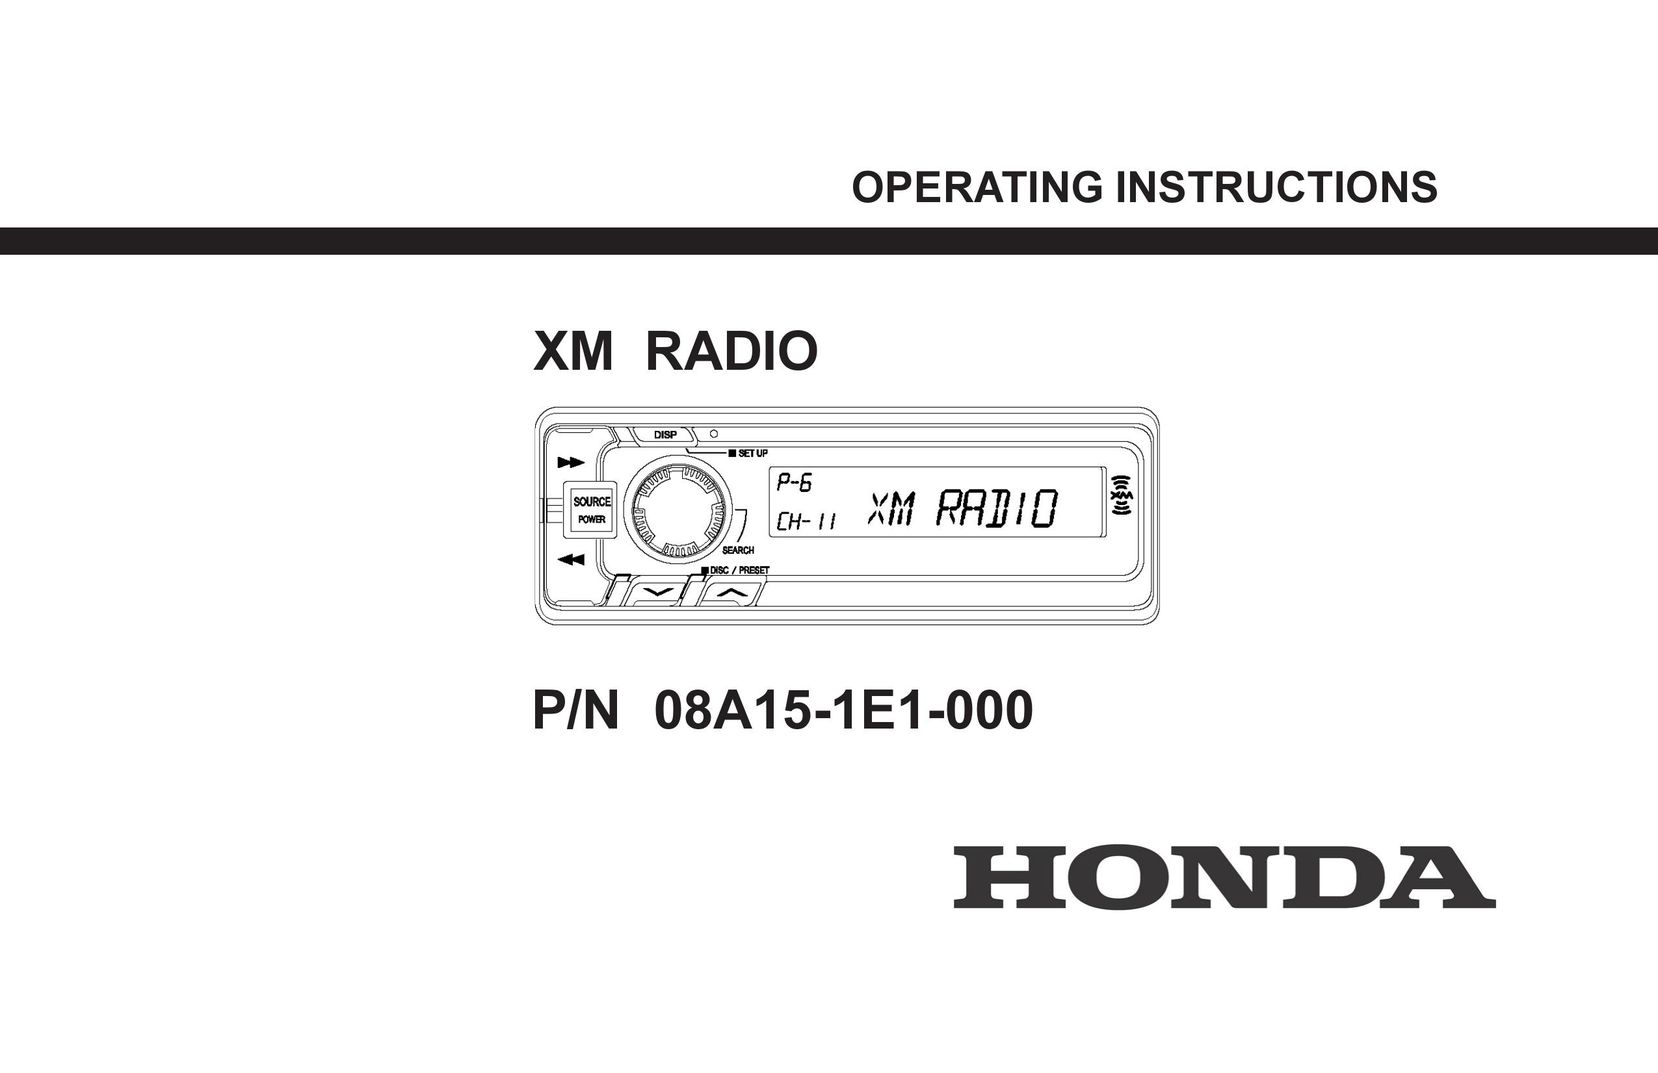 XM Satellite Radio P/N 08A15-1E1-000 Stereo System User Manual